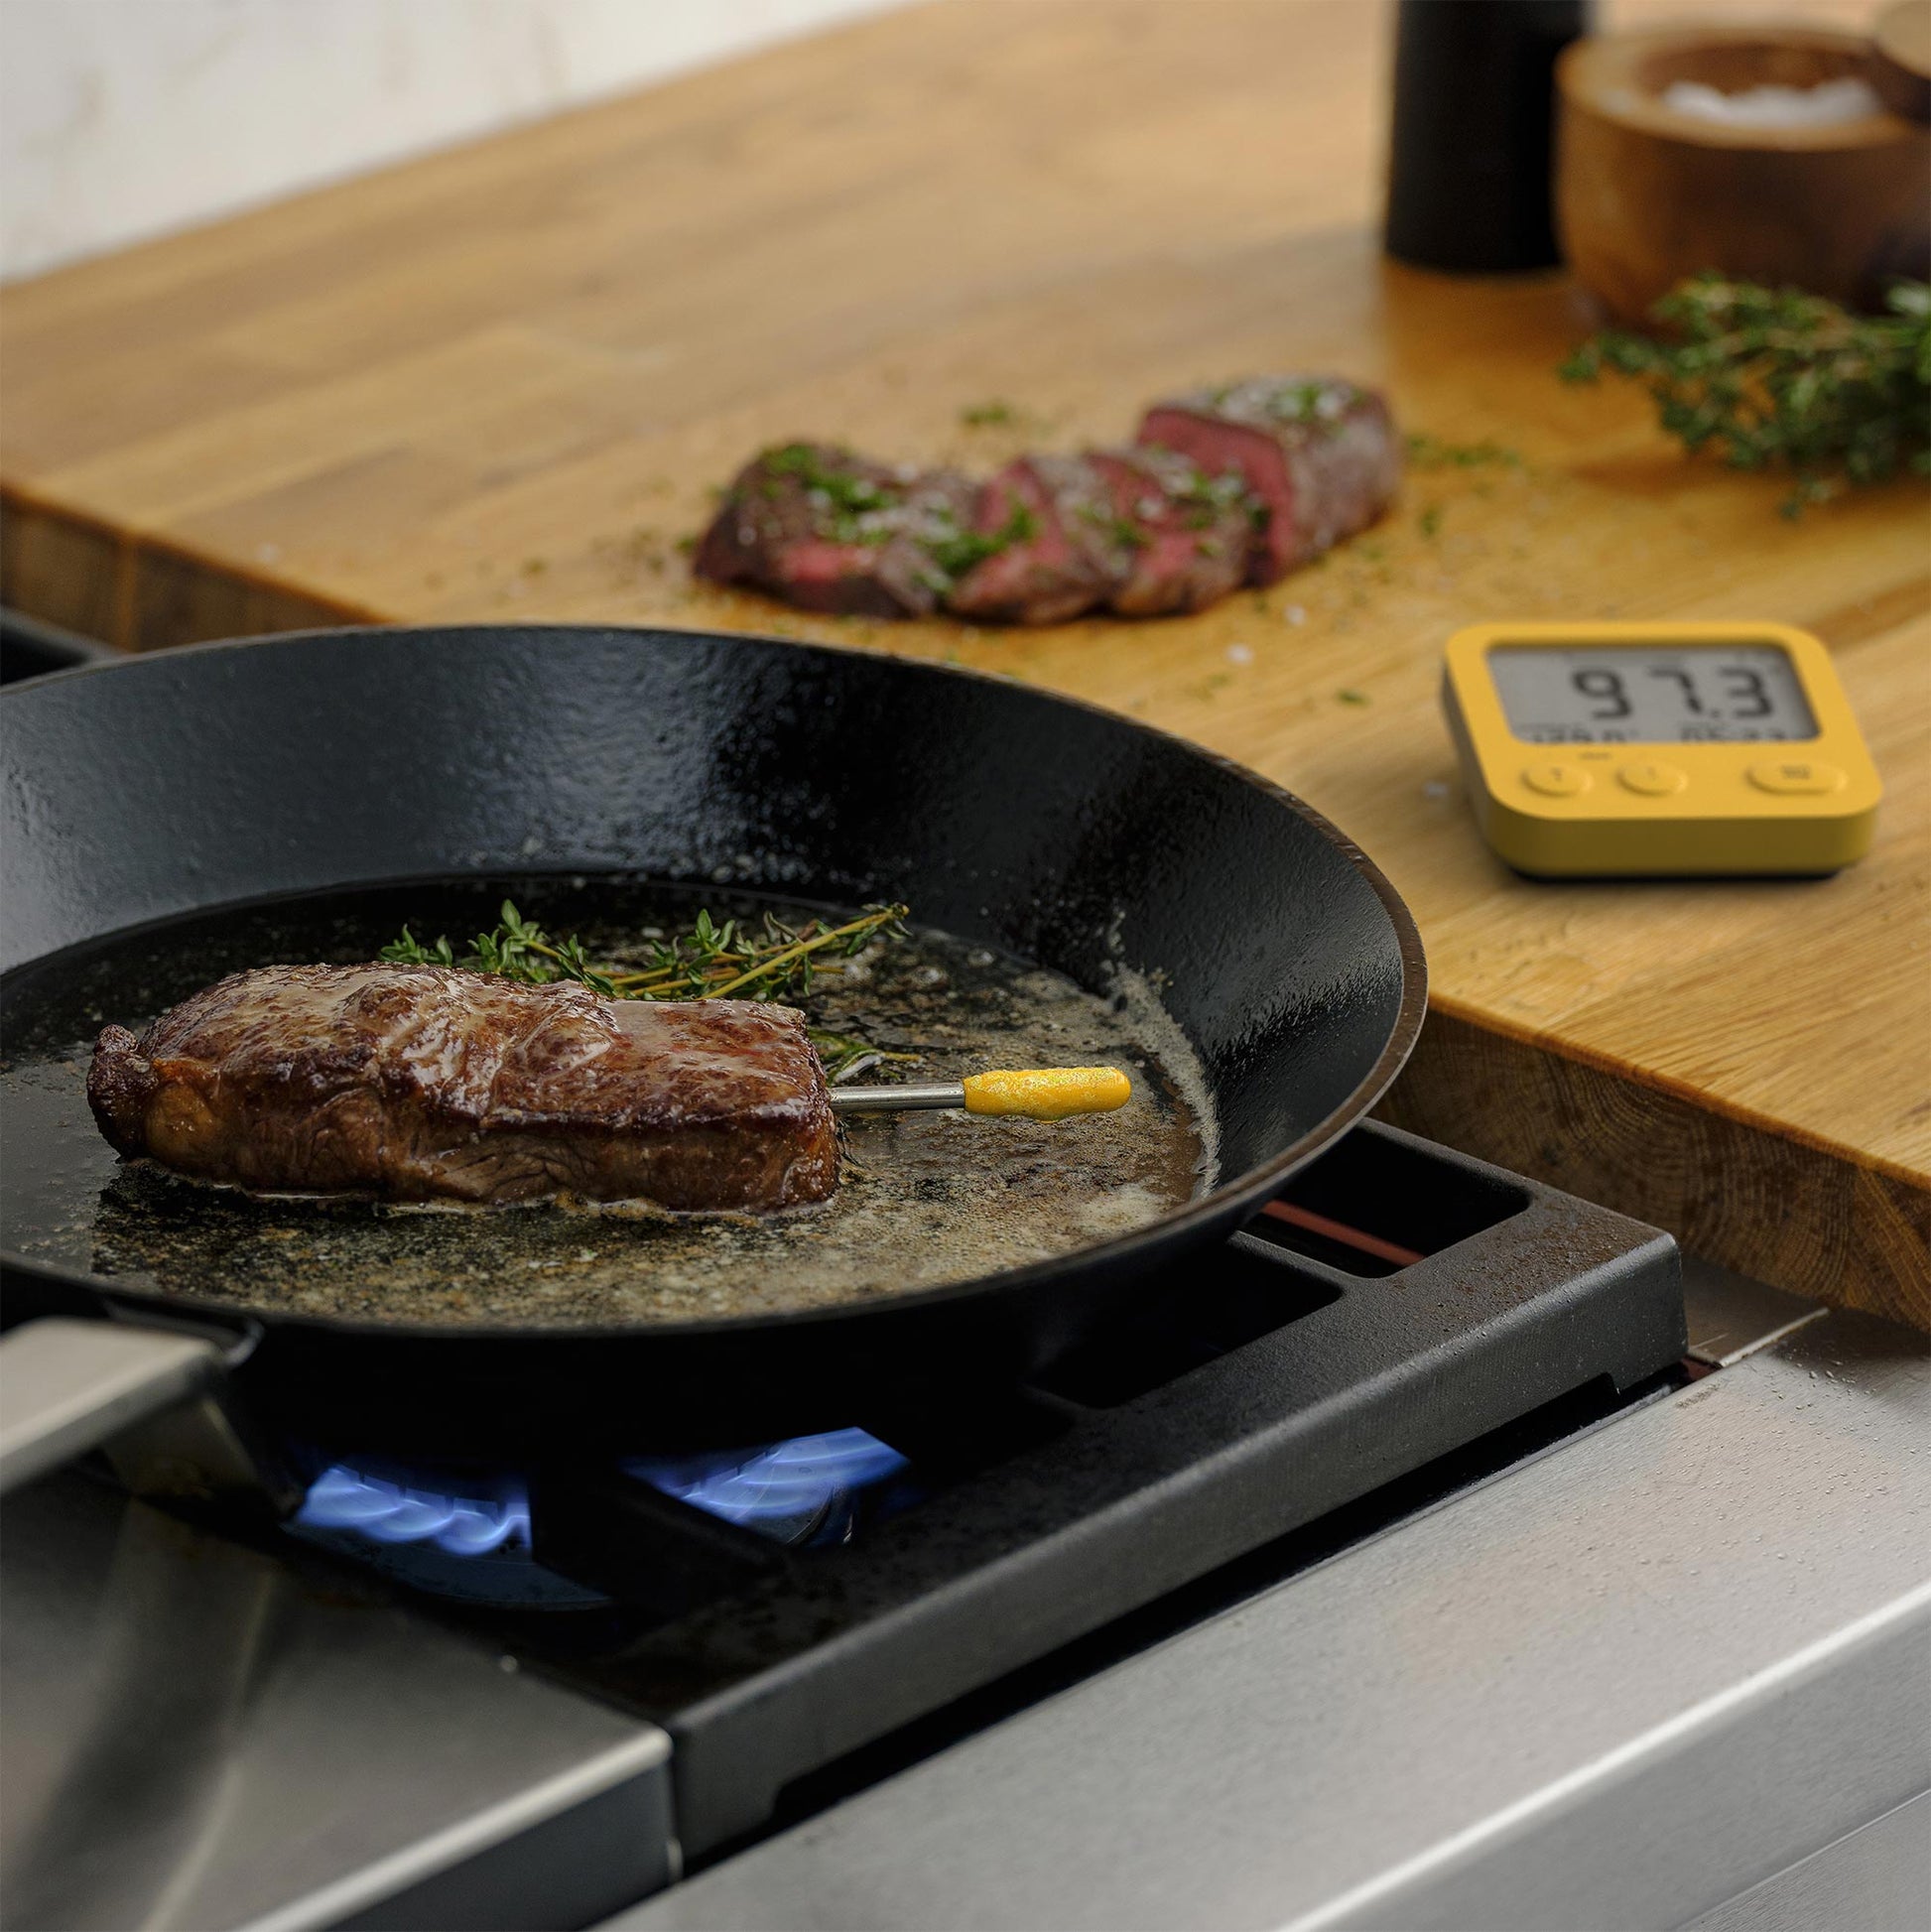 Cooking steak in a pan with the Combustion Predictive Thermometer and Display, using a carbon steel pan on a gas range. Looks delicious. You can see a sliced, perfectly-cooked steak in the background. 